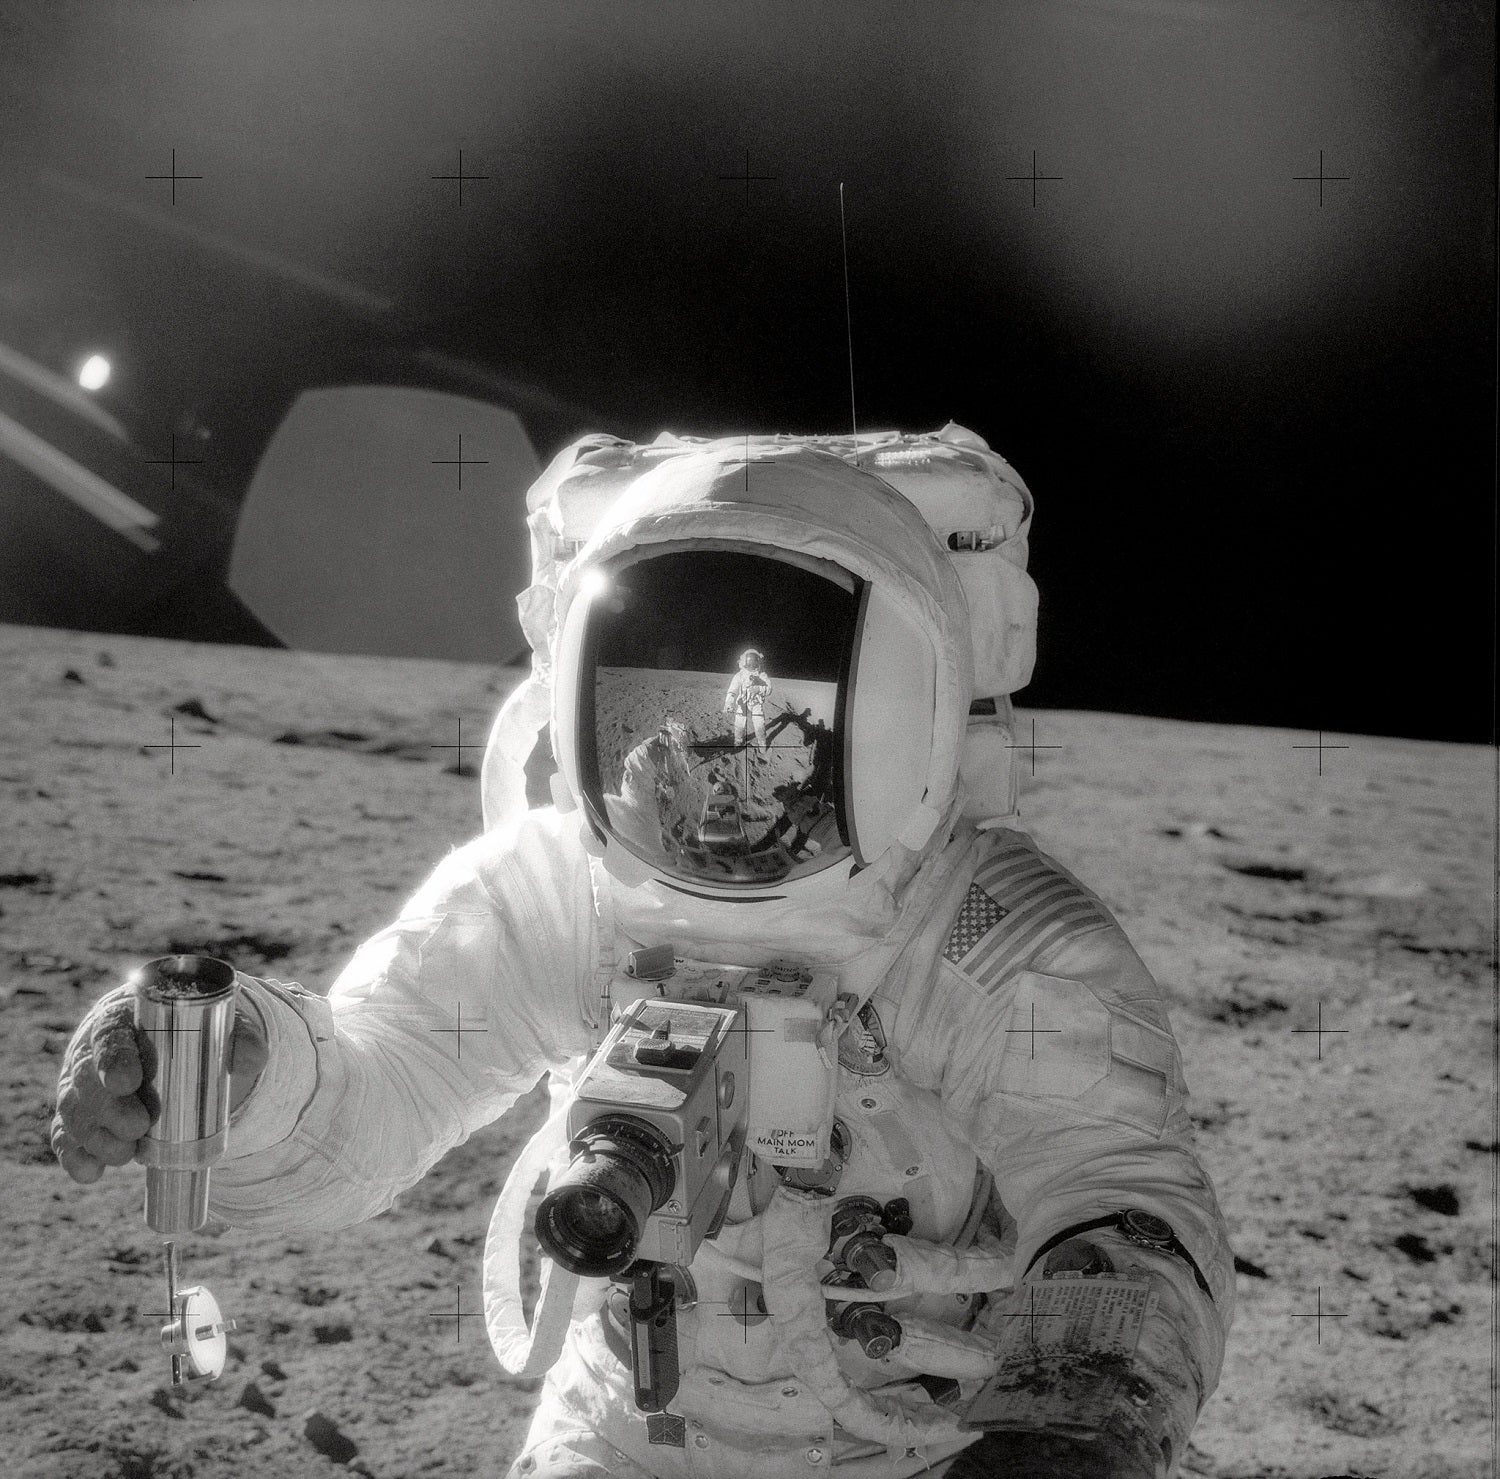 Apollo 12 astronaut on moon holding lunar sample to help determine how old the Earth is